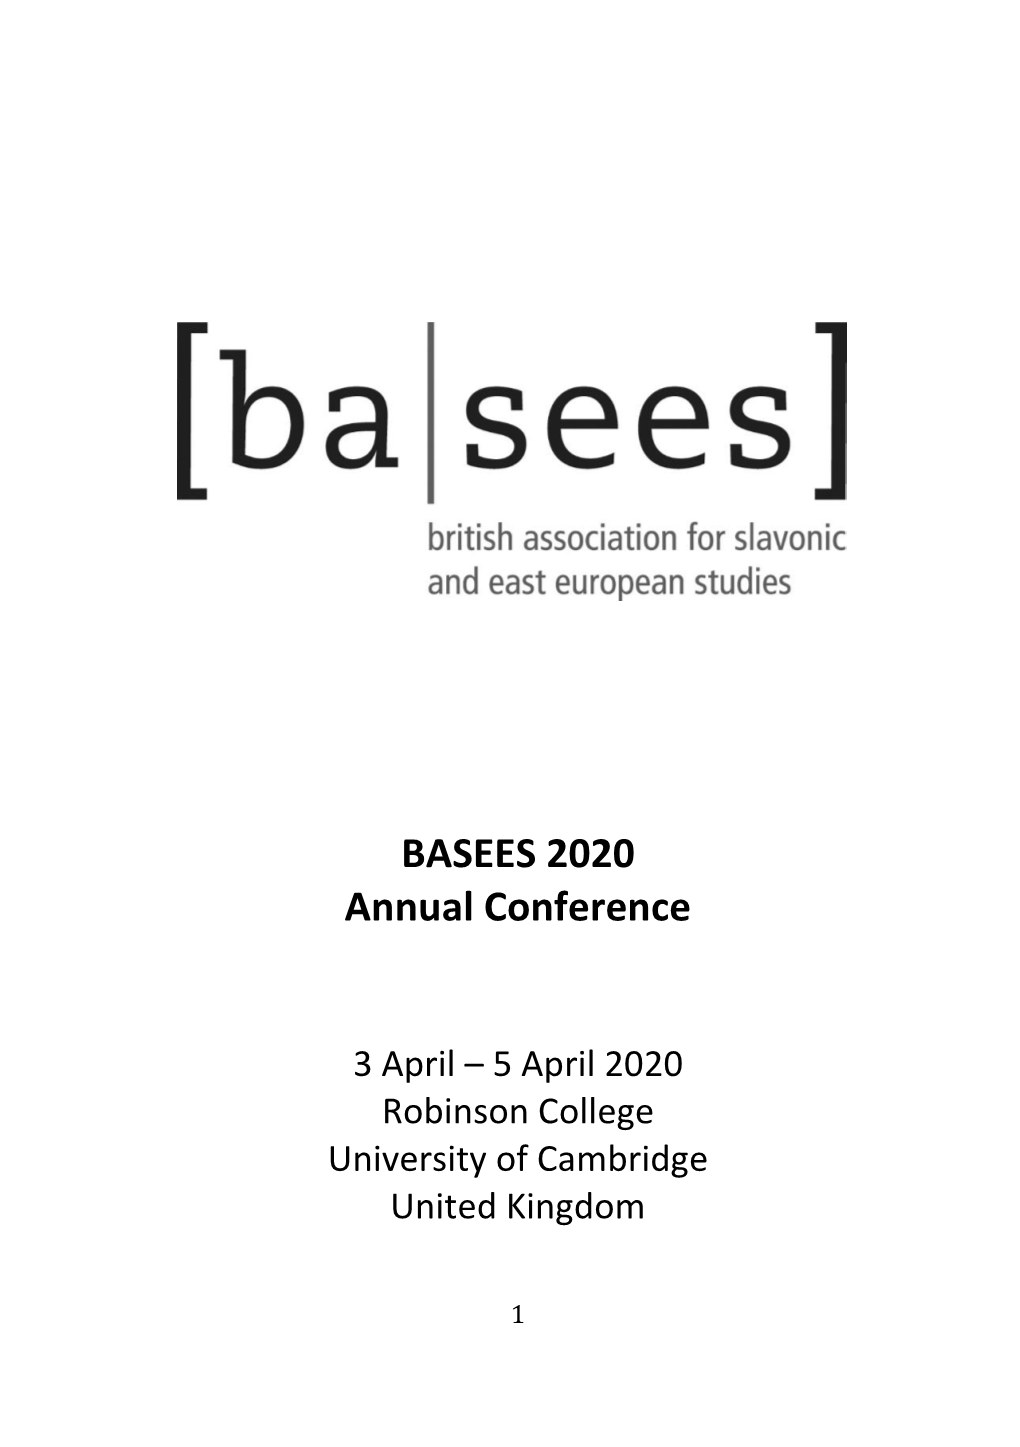 BASEES 2020 Annual Conference